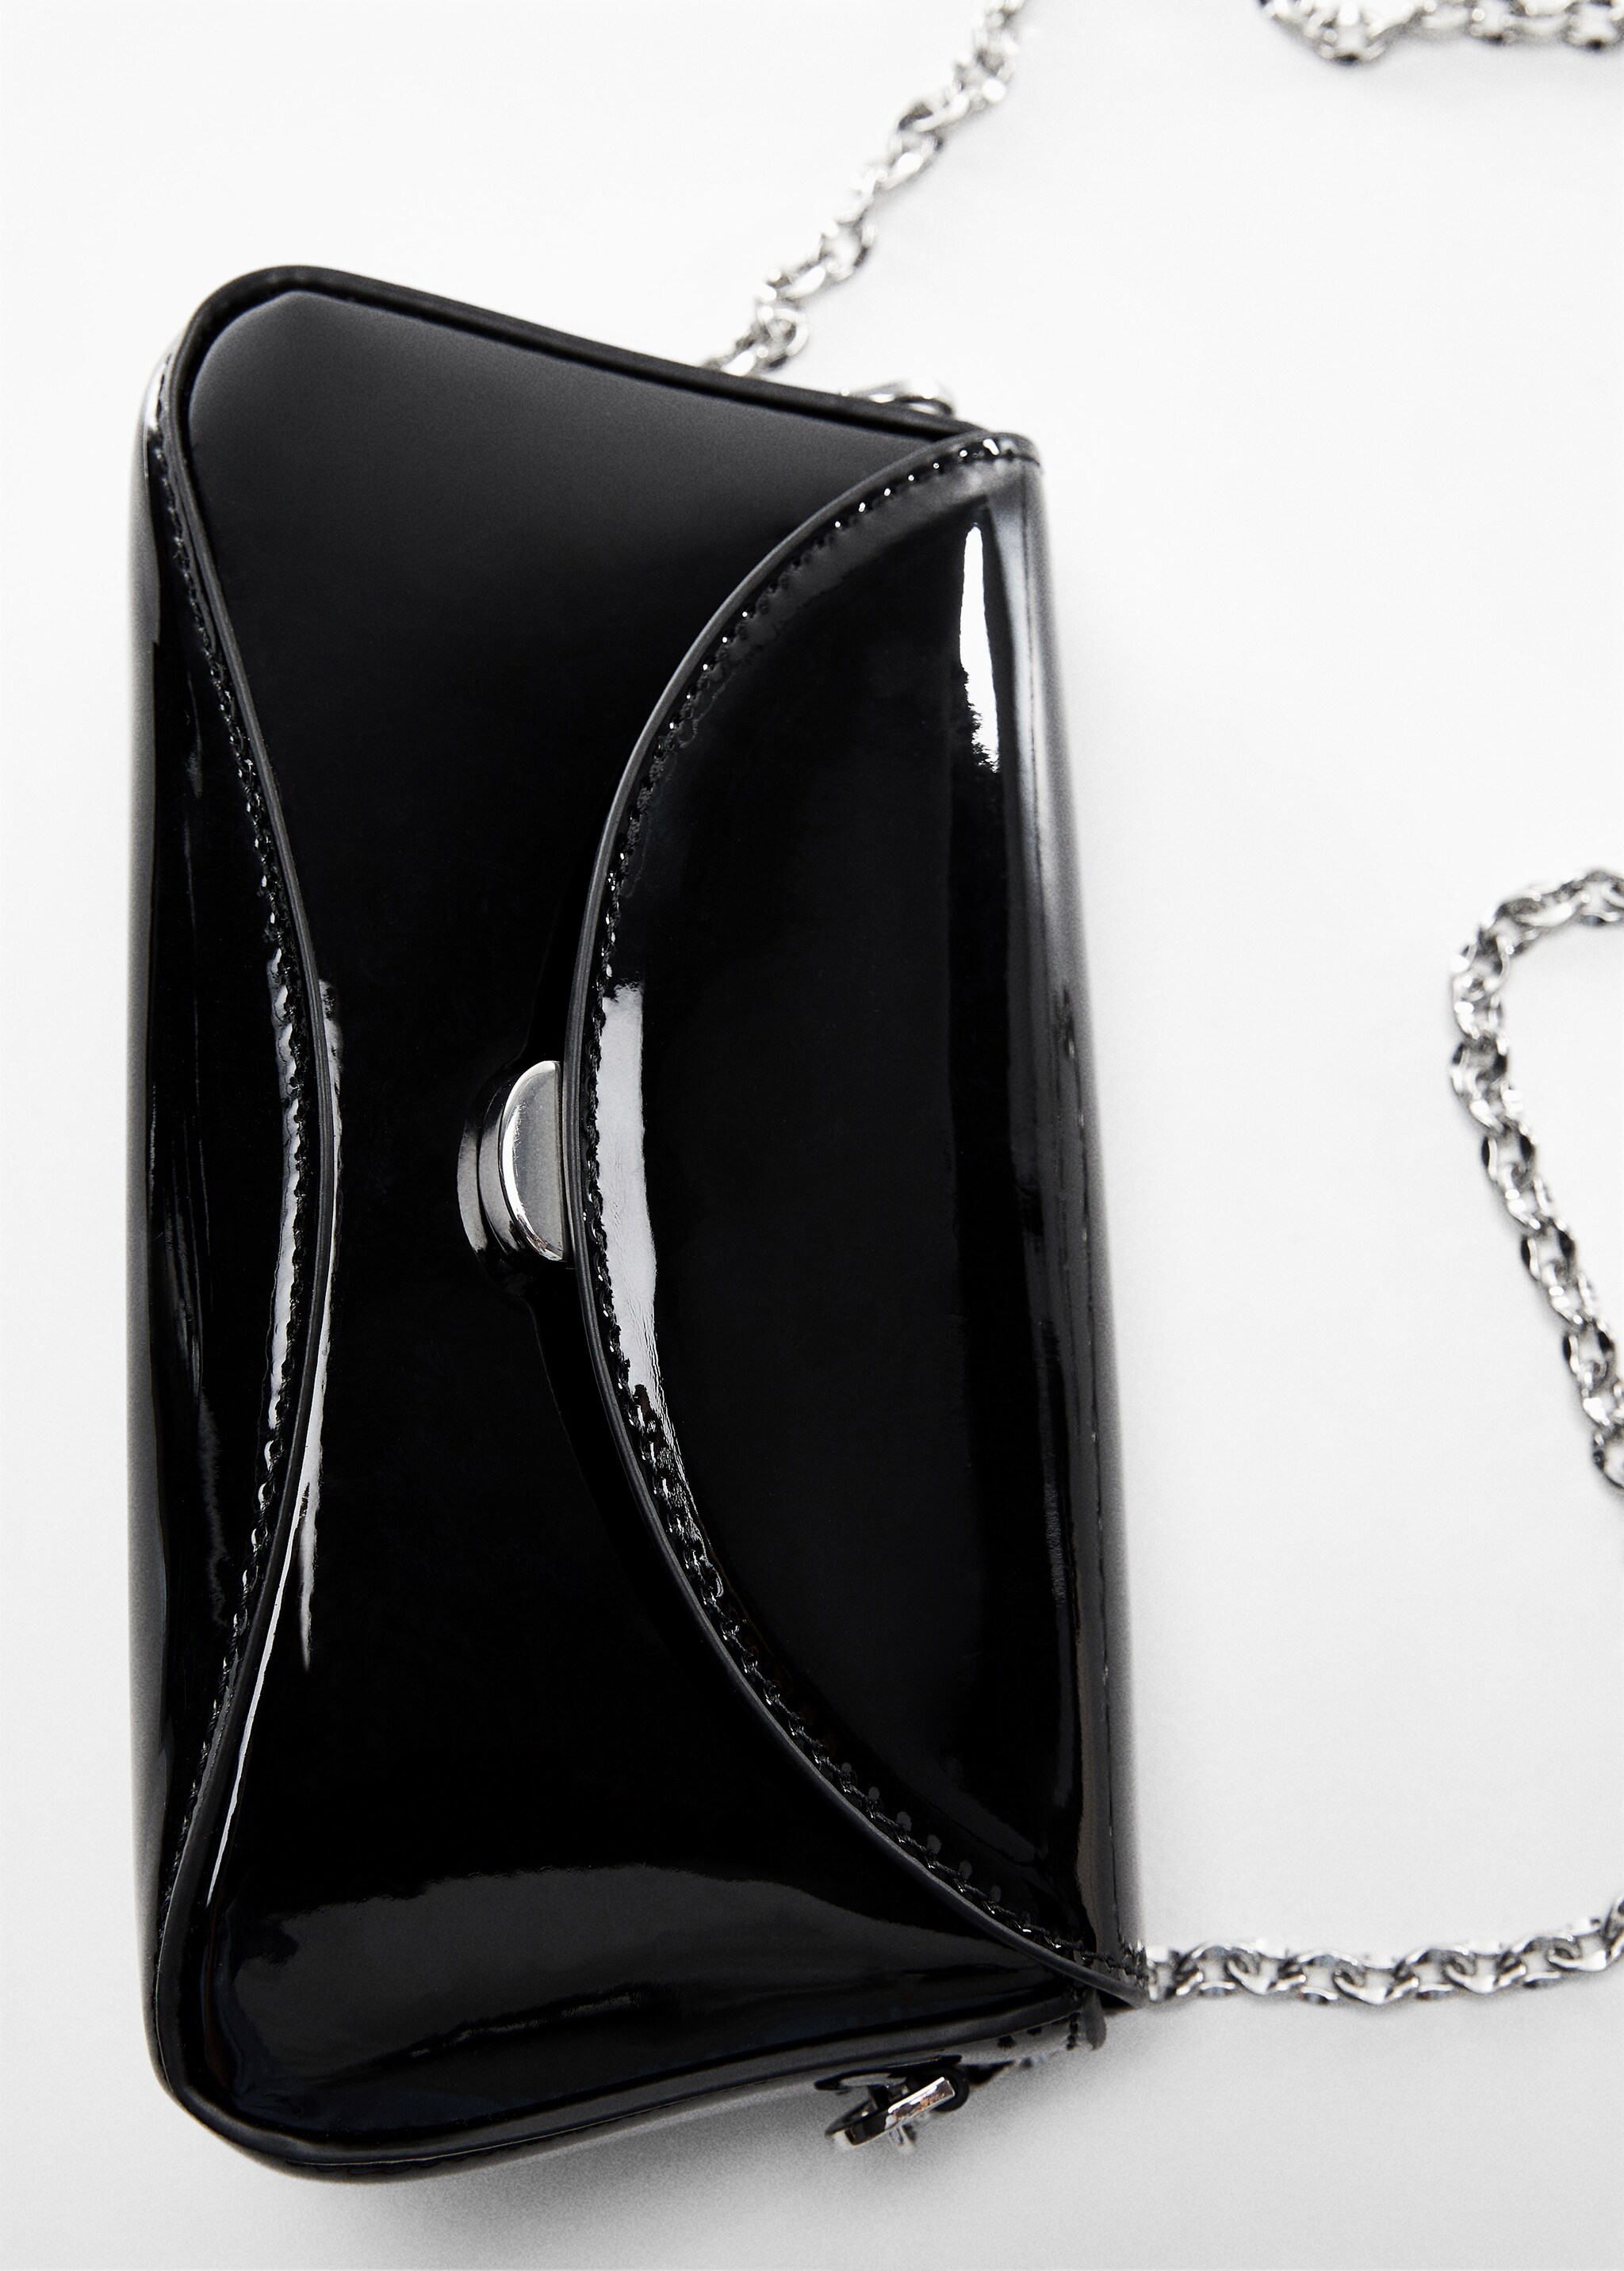 Patent leather chain handbag - Details of the article 5